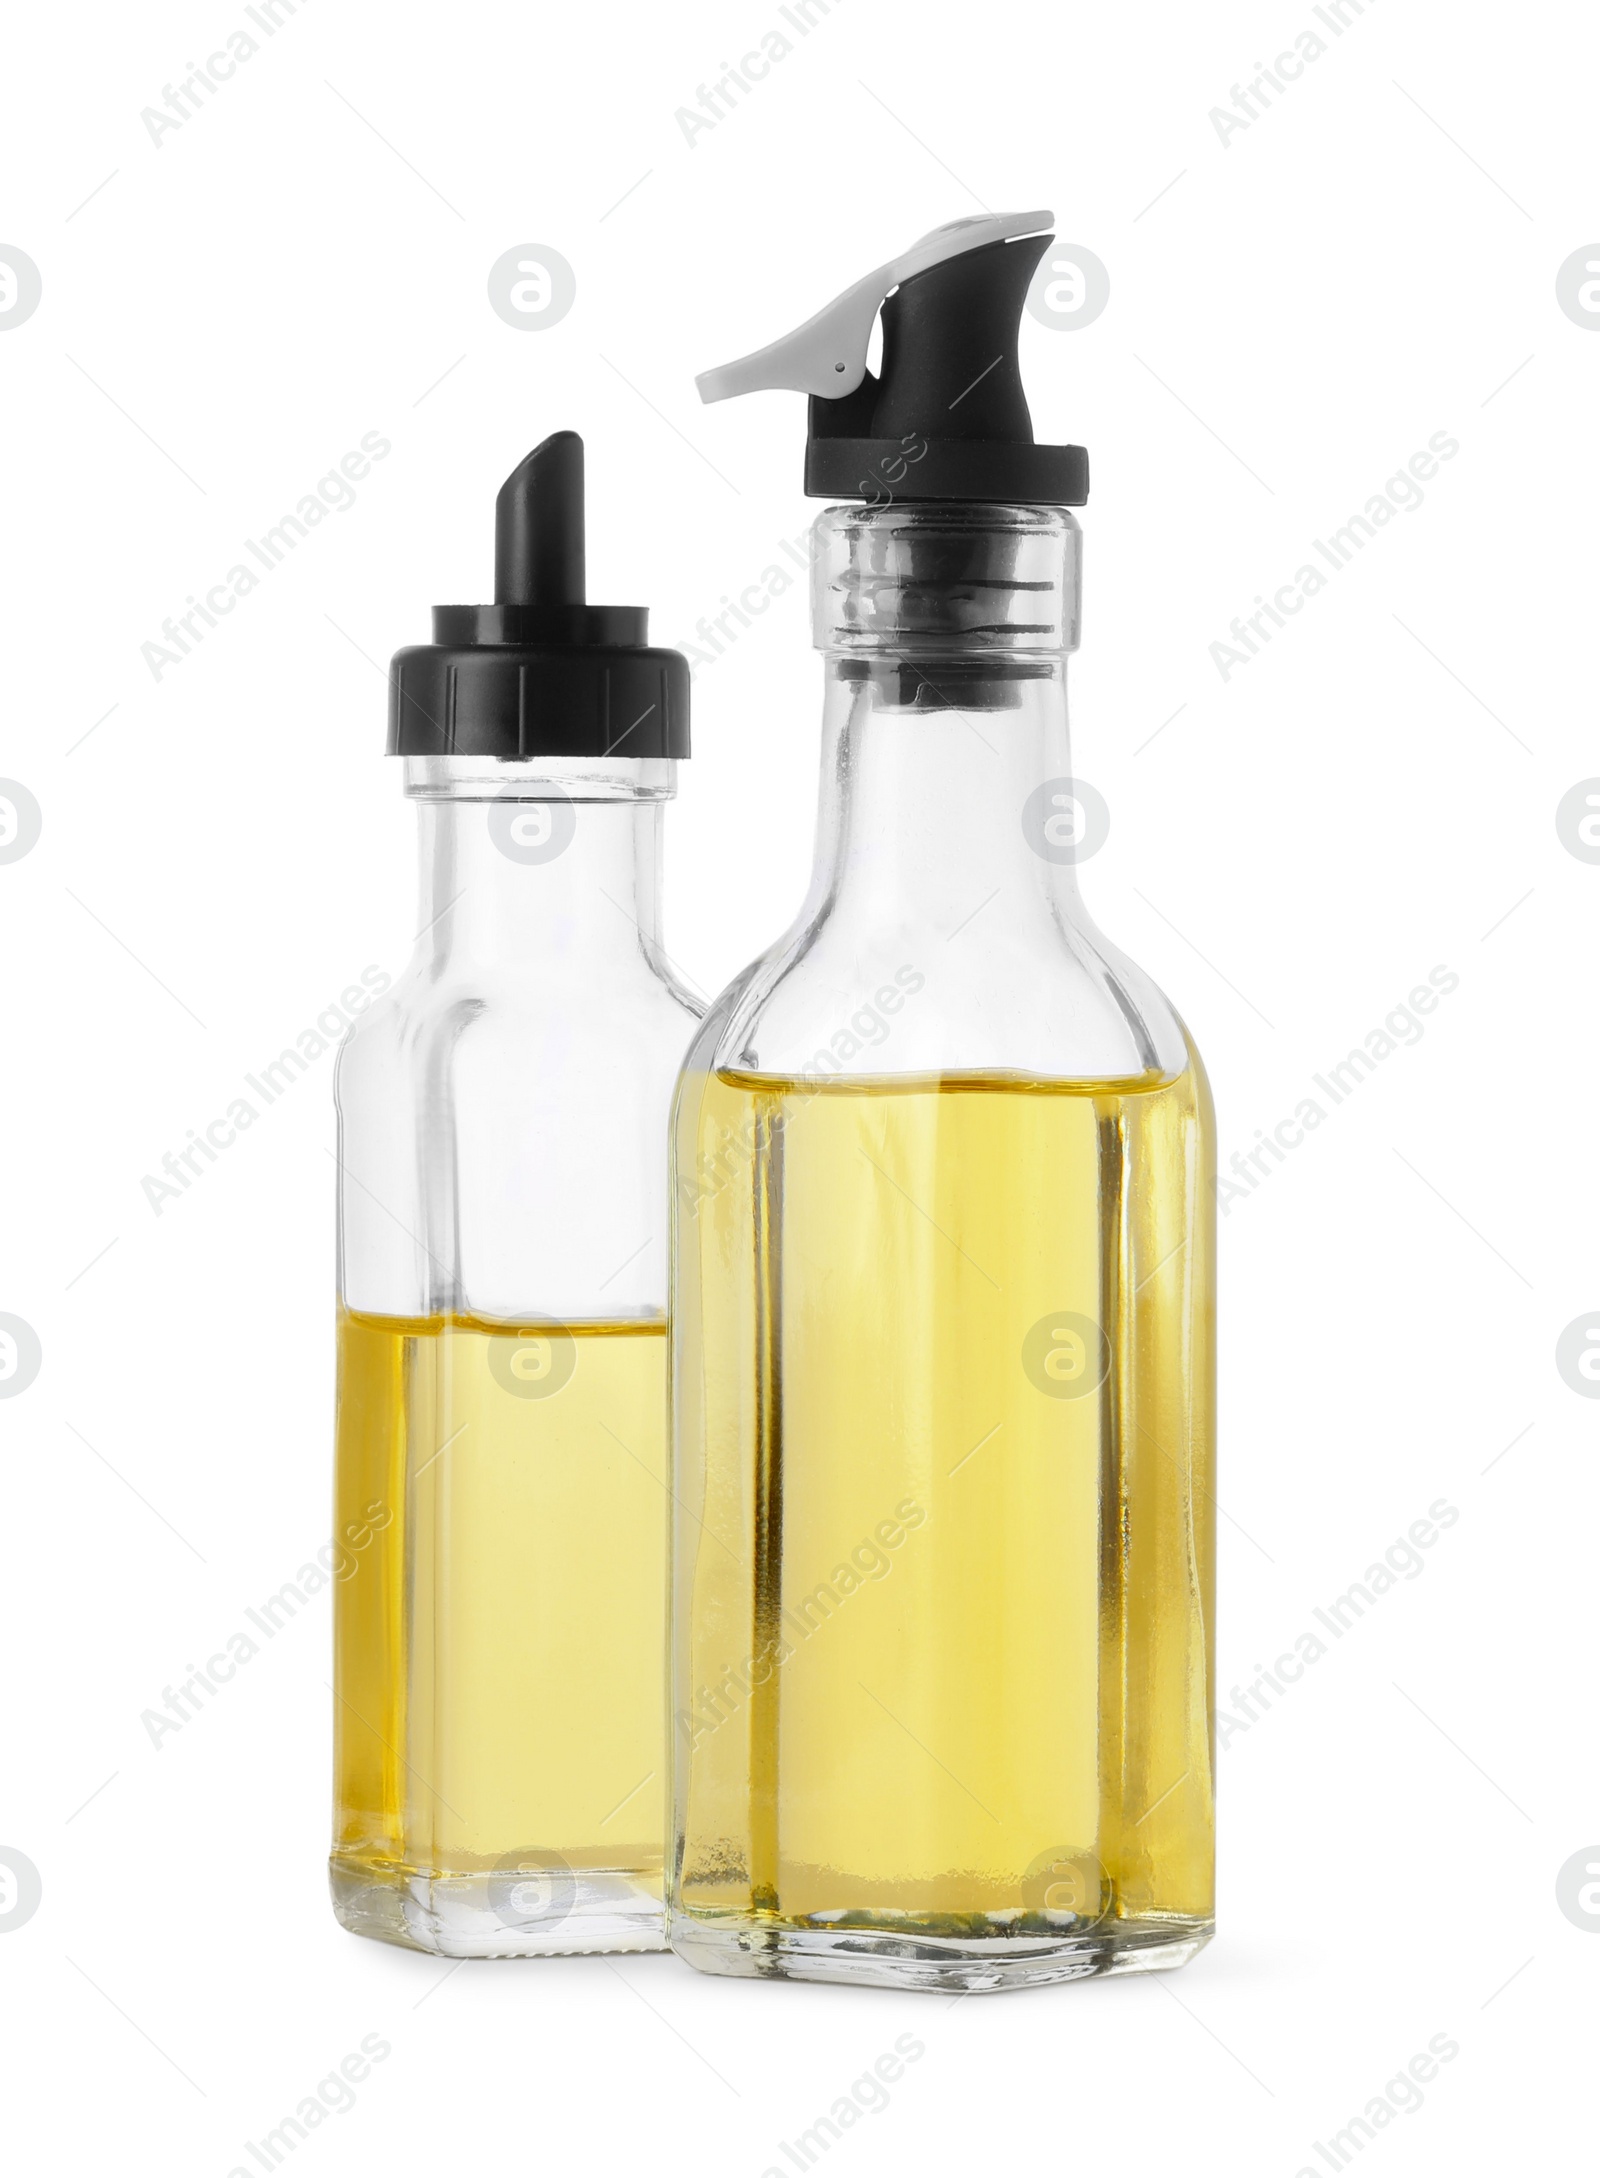 Photo of Different glass bottles of cooking oil on white background